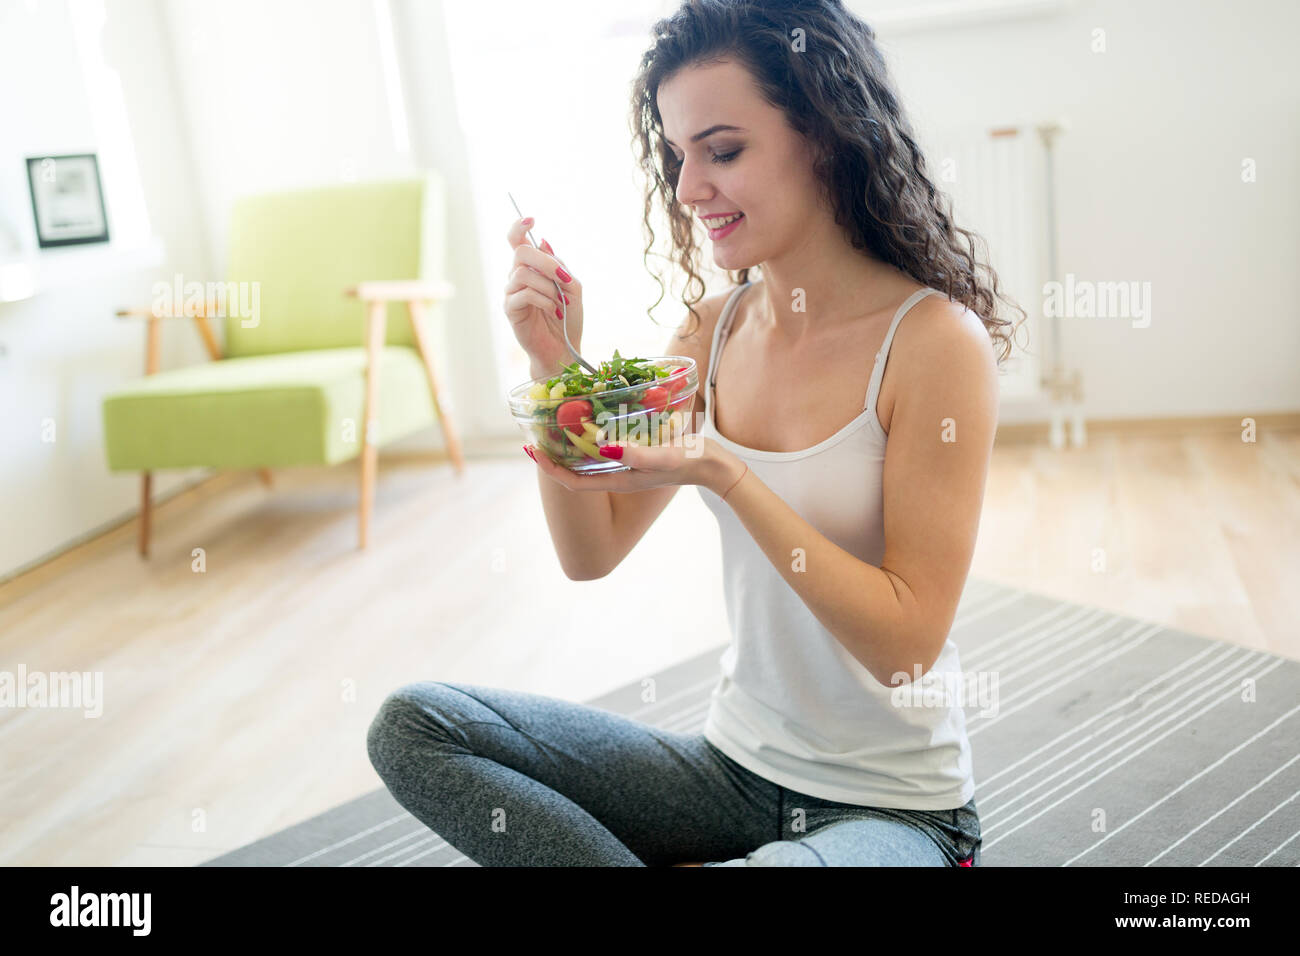 Fitness woman eating healthy food after workout Stock Photo